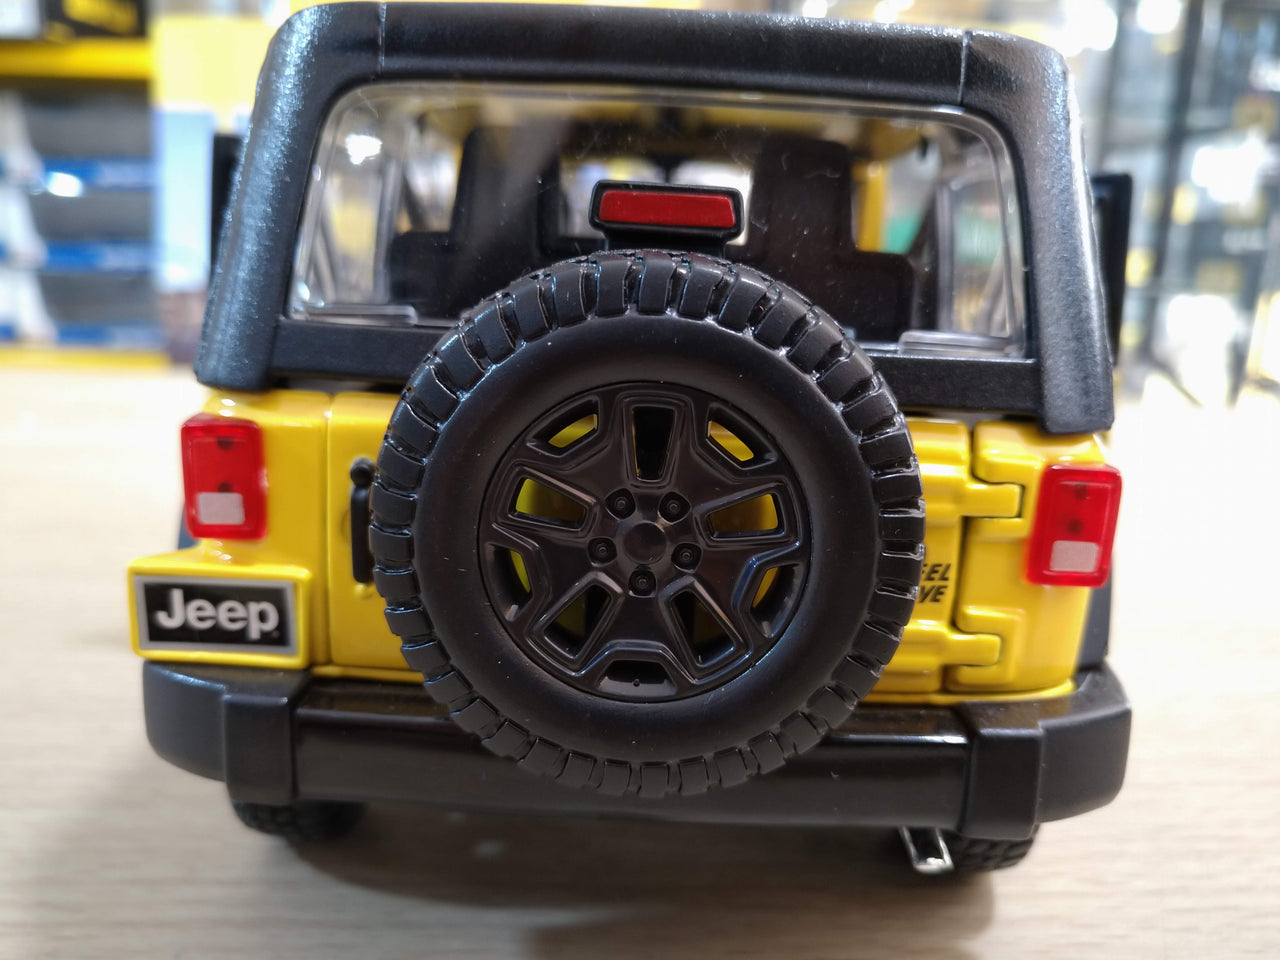 31676 Jeep Wrangler Year 2014 Scale 1:18 (Maisto Special Edition)